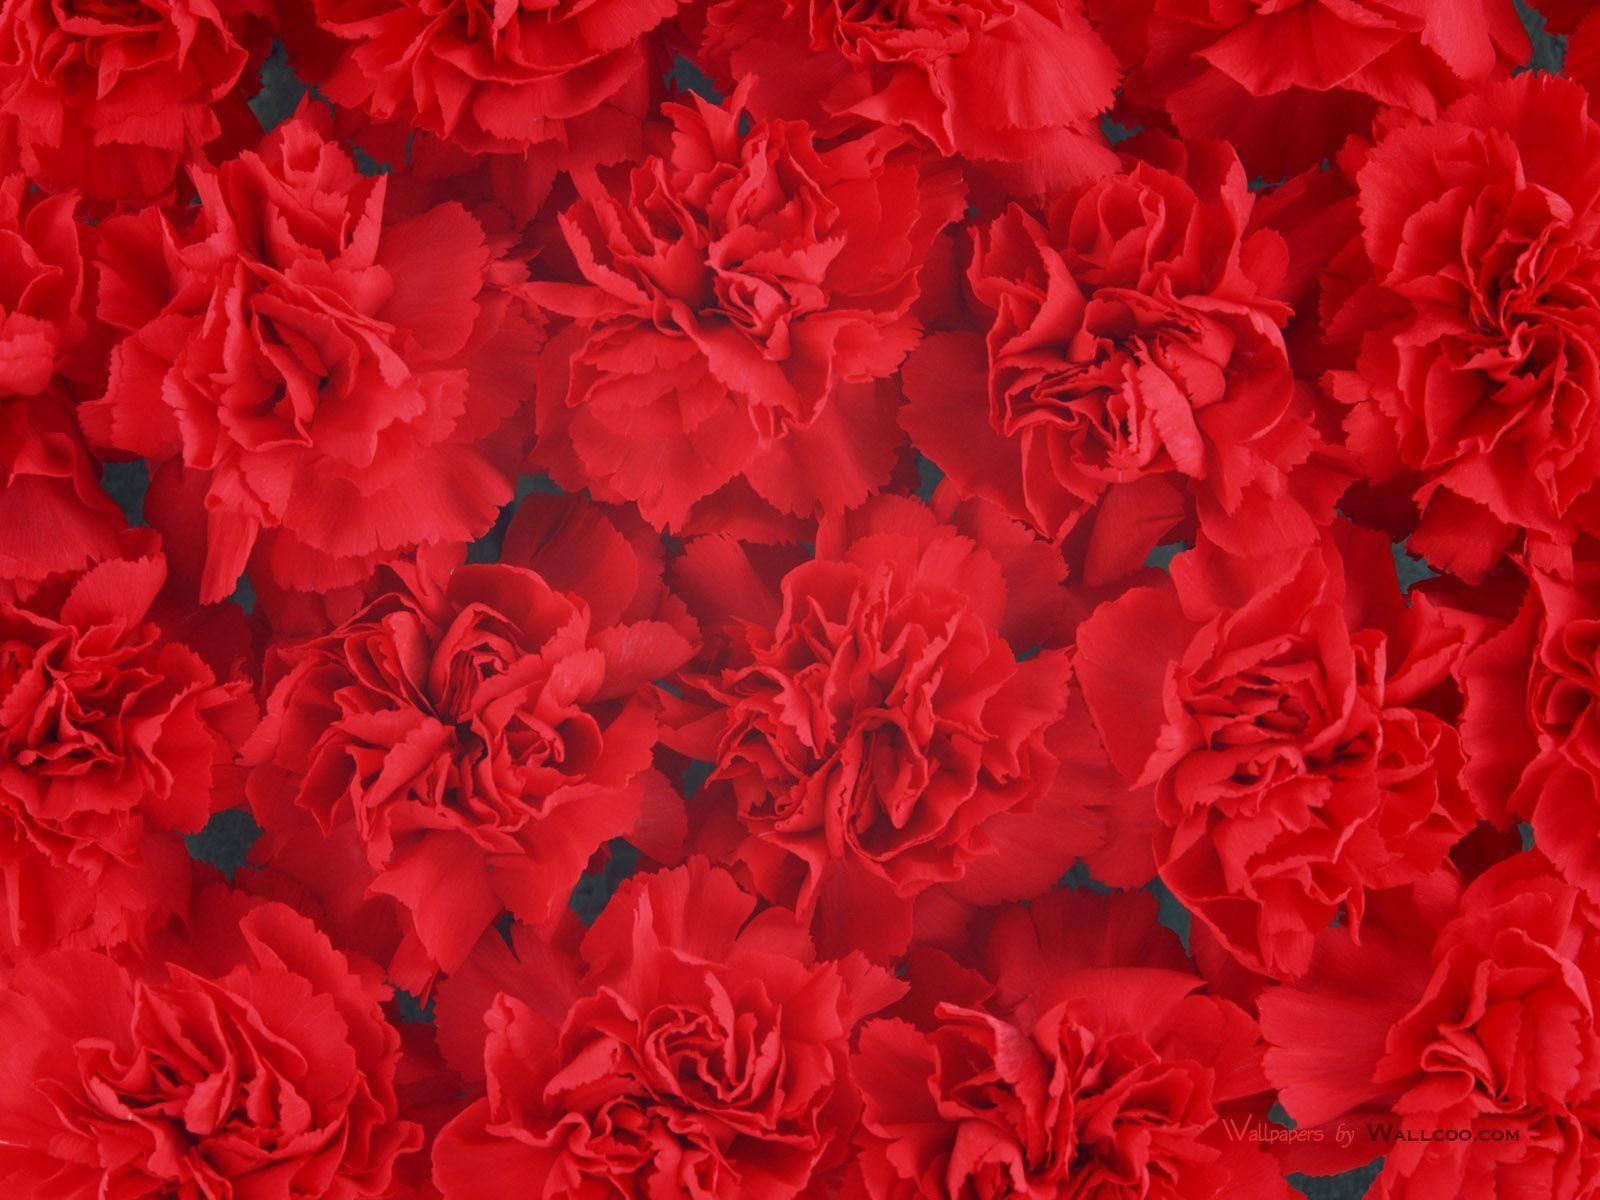 Wallpaper For > Red Flower Background Image